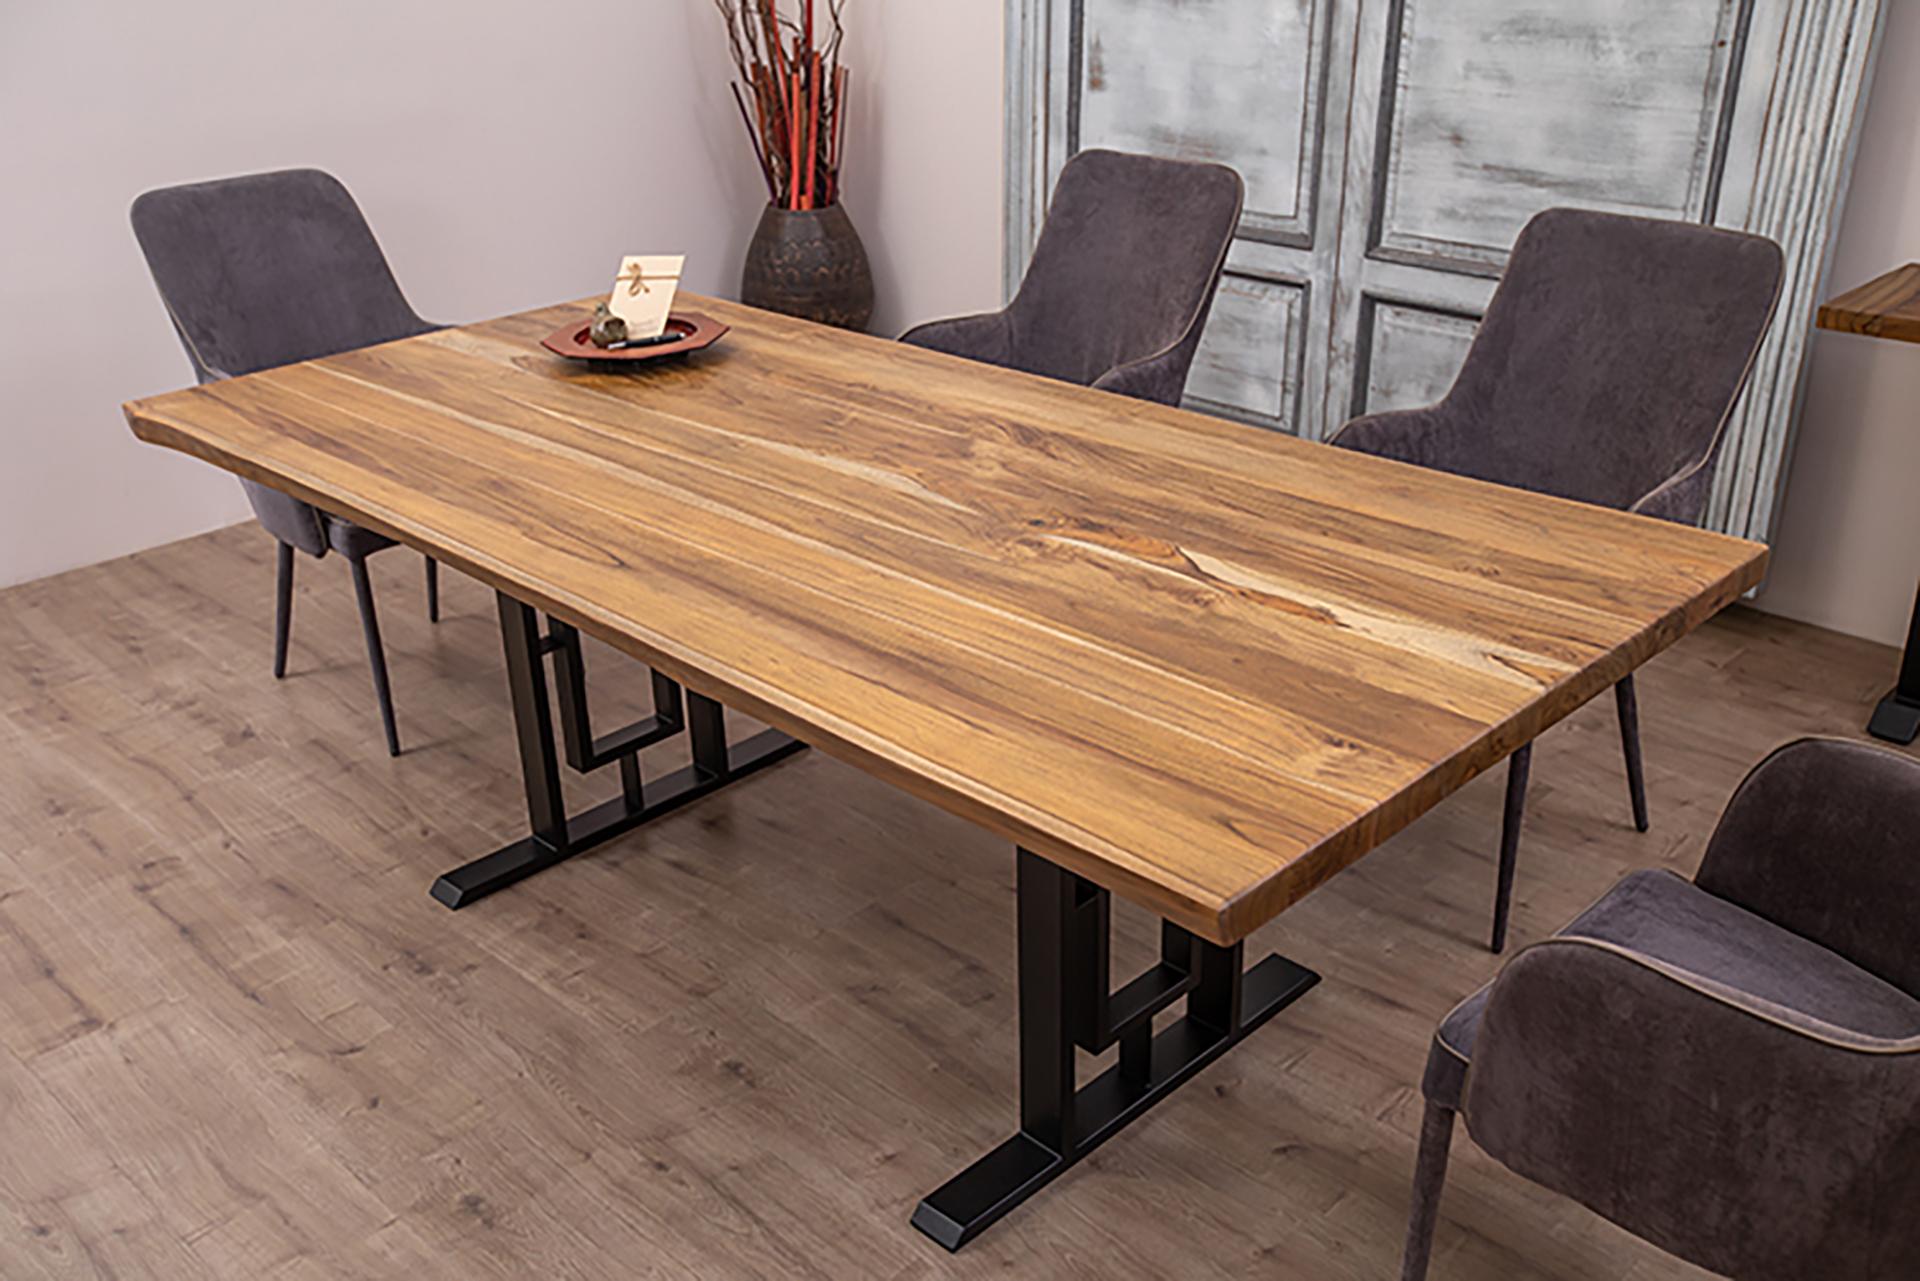 Thai 100% Solid Teak Live Edge Dining Table in Autumn, Color Chip Sample Available For Sale